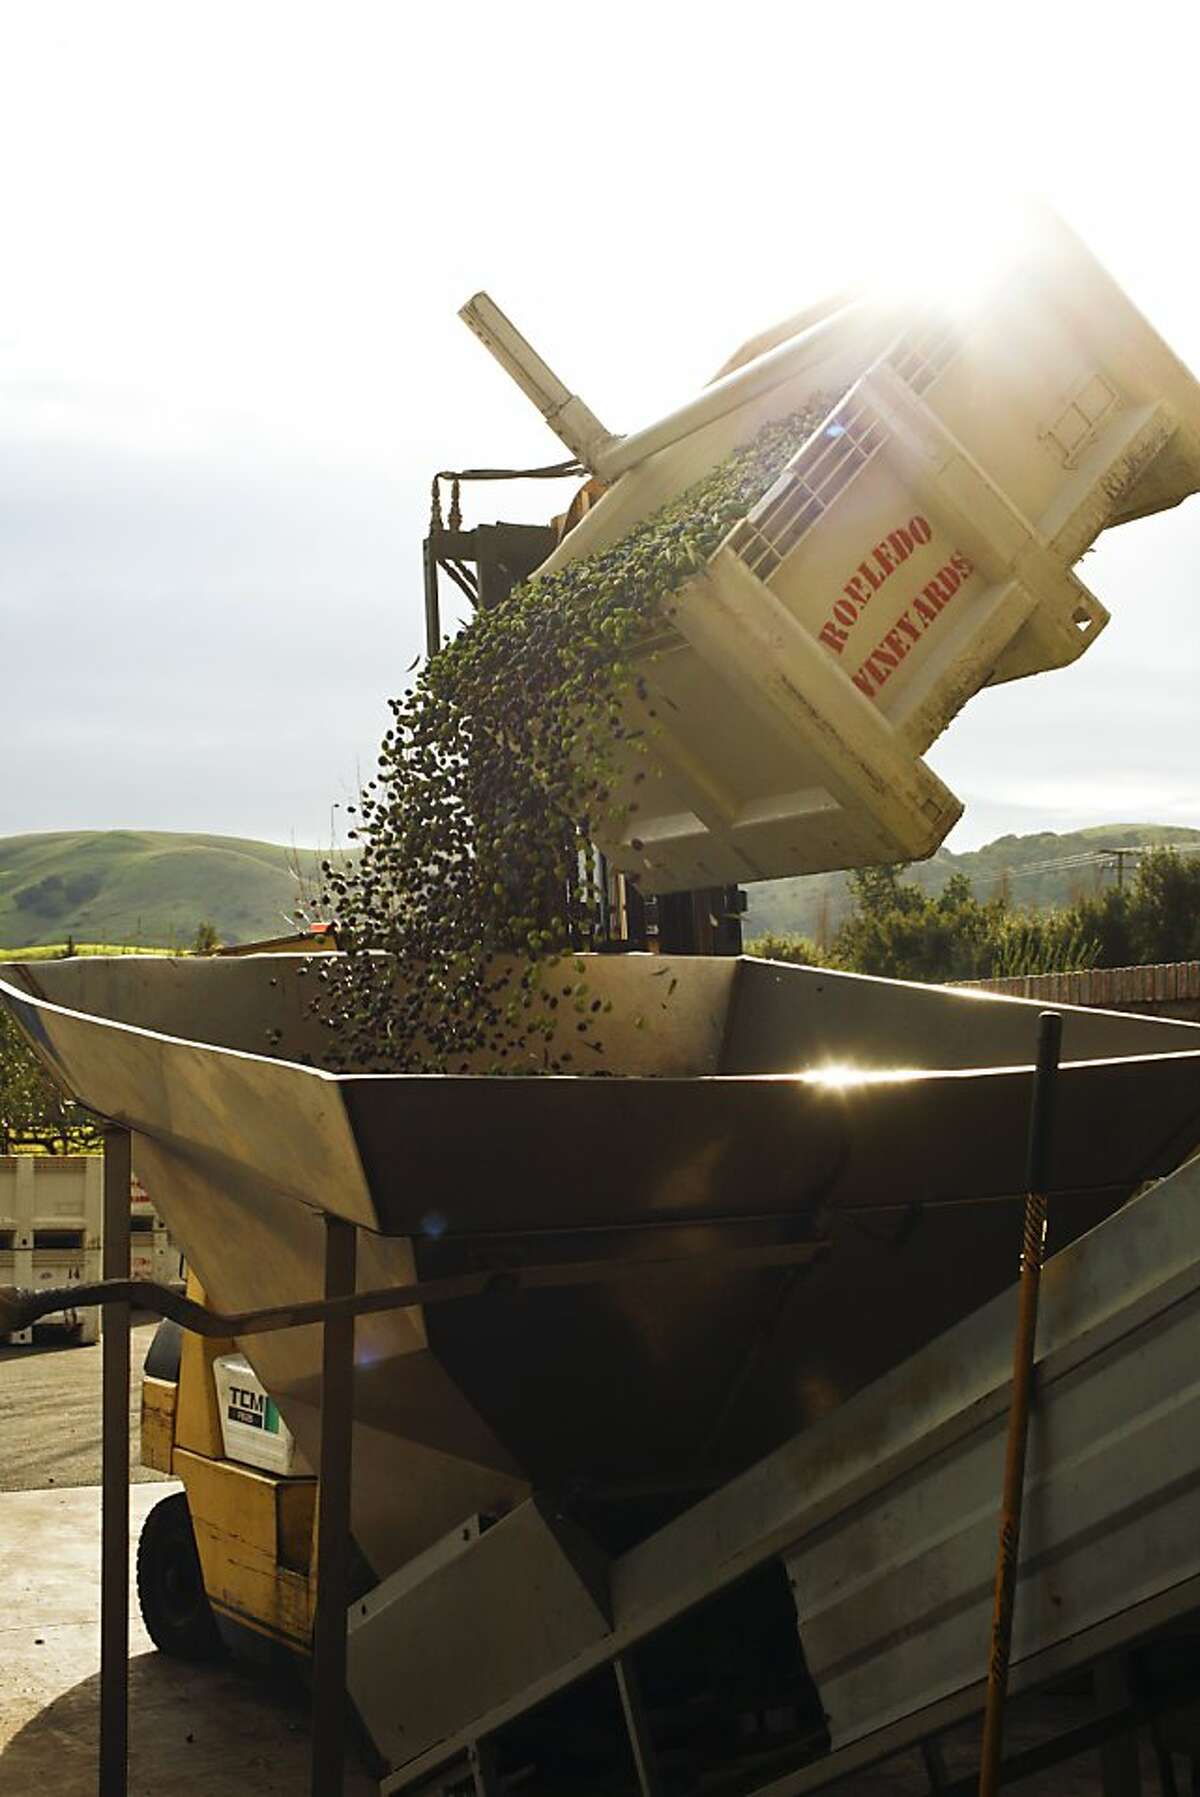 Olives going into the olive press at The Olive Press as seen in Sonoma, California, on Thursday, December 20, 2012.